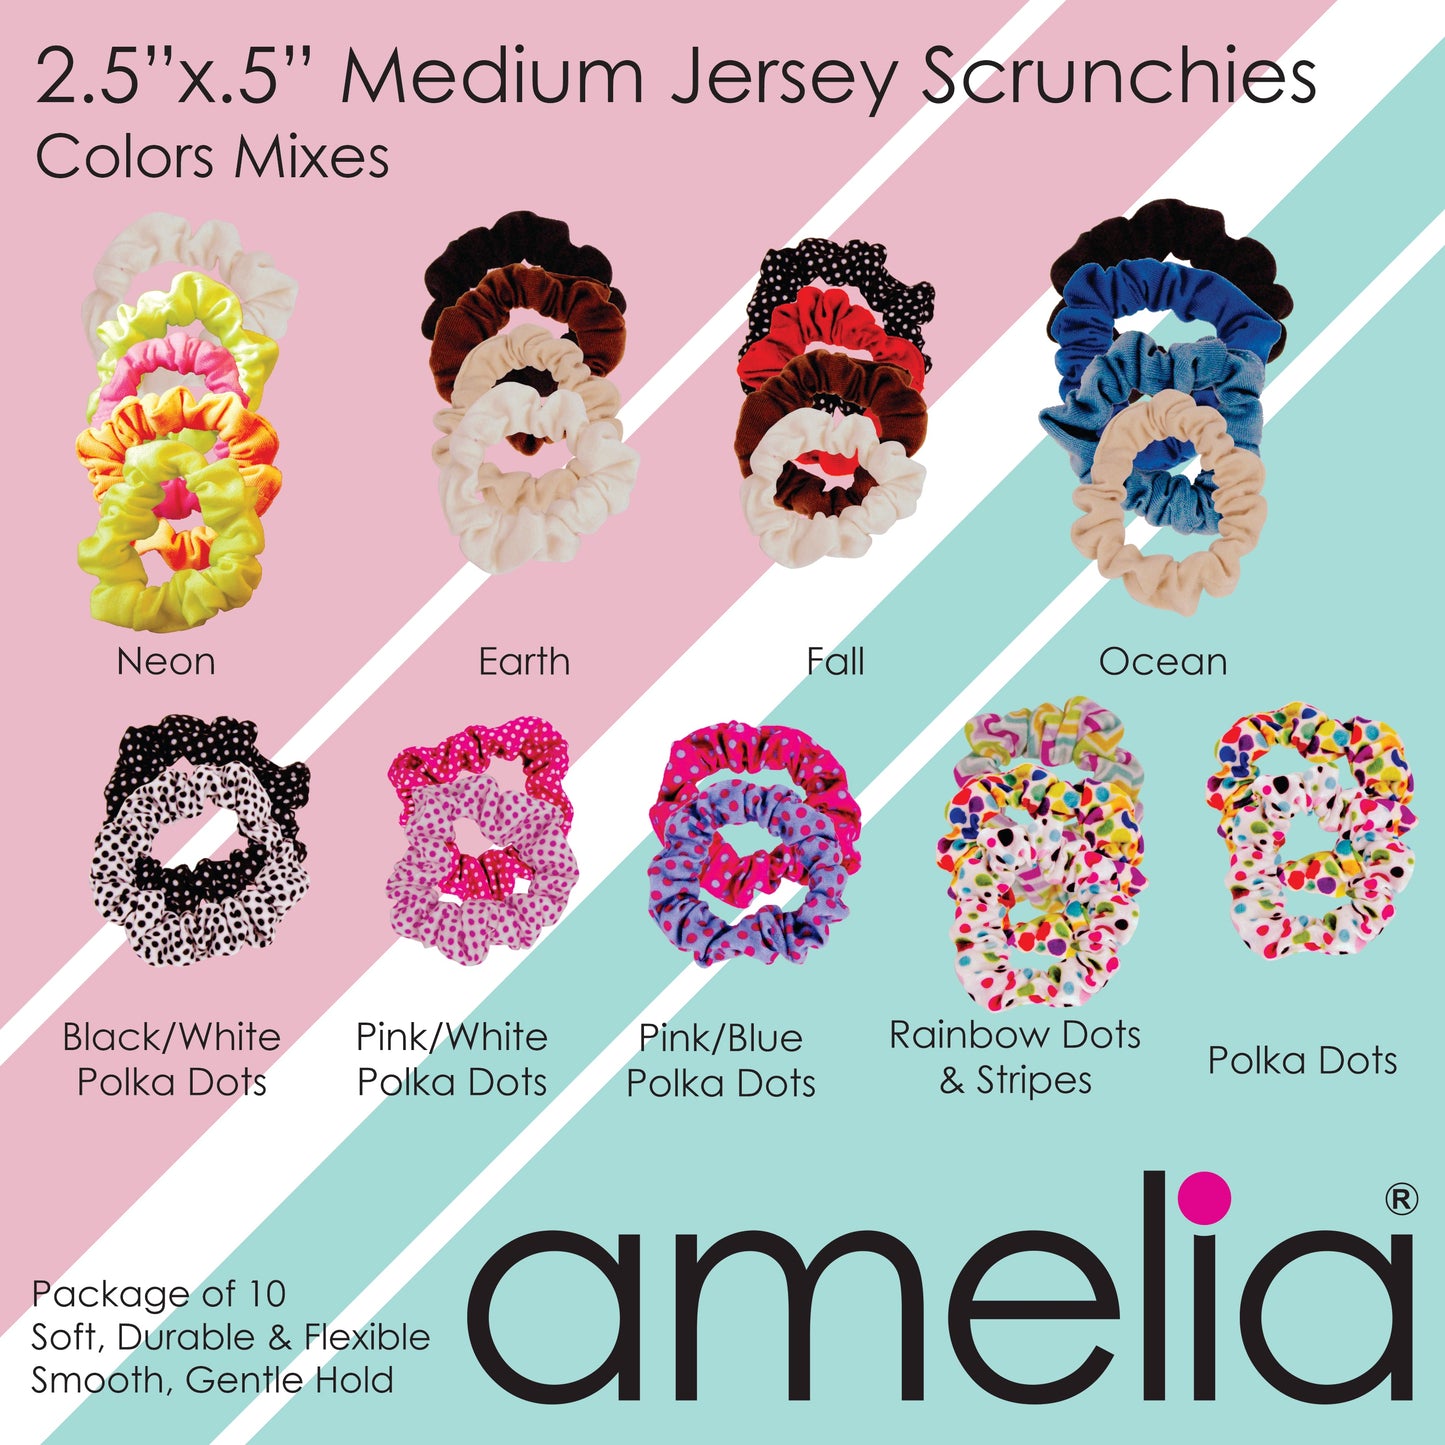 Amelia Beauty, Medium Tan Jersey Scrunchies, 2.5in Diameter, Gentle on Hair, Strong Hold, No Snag, No Dents or Creases. 10 Pack